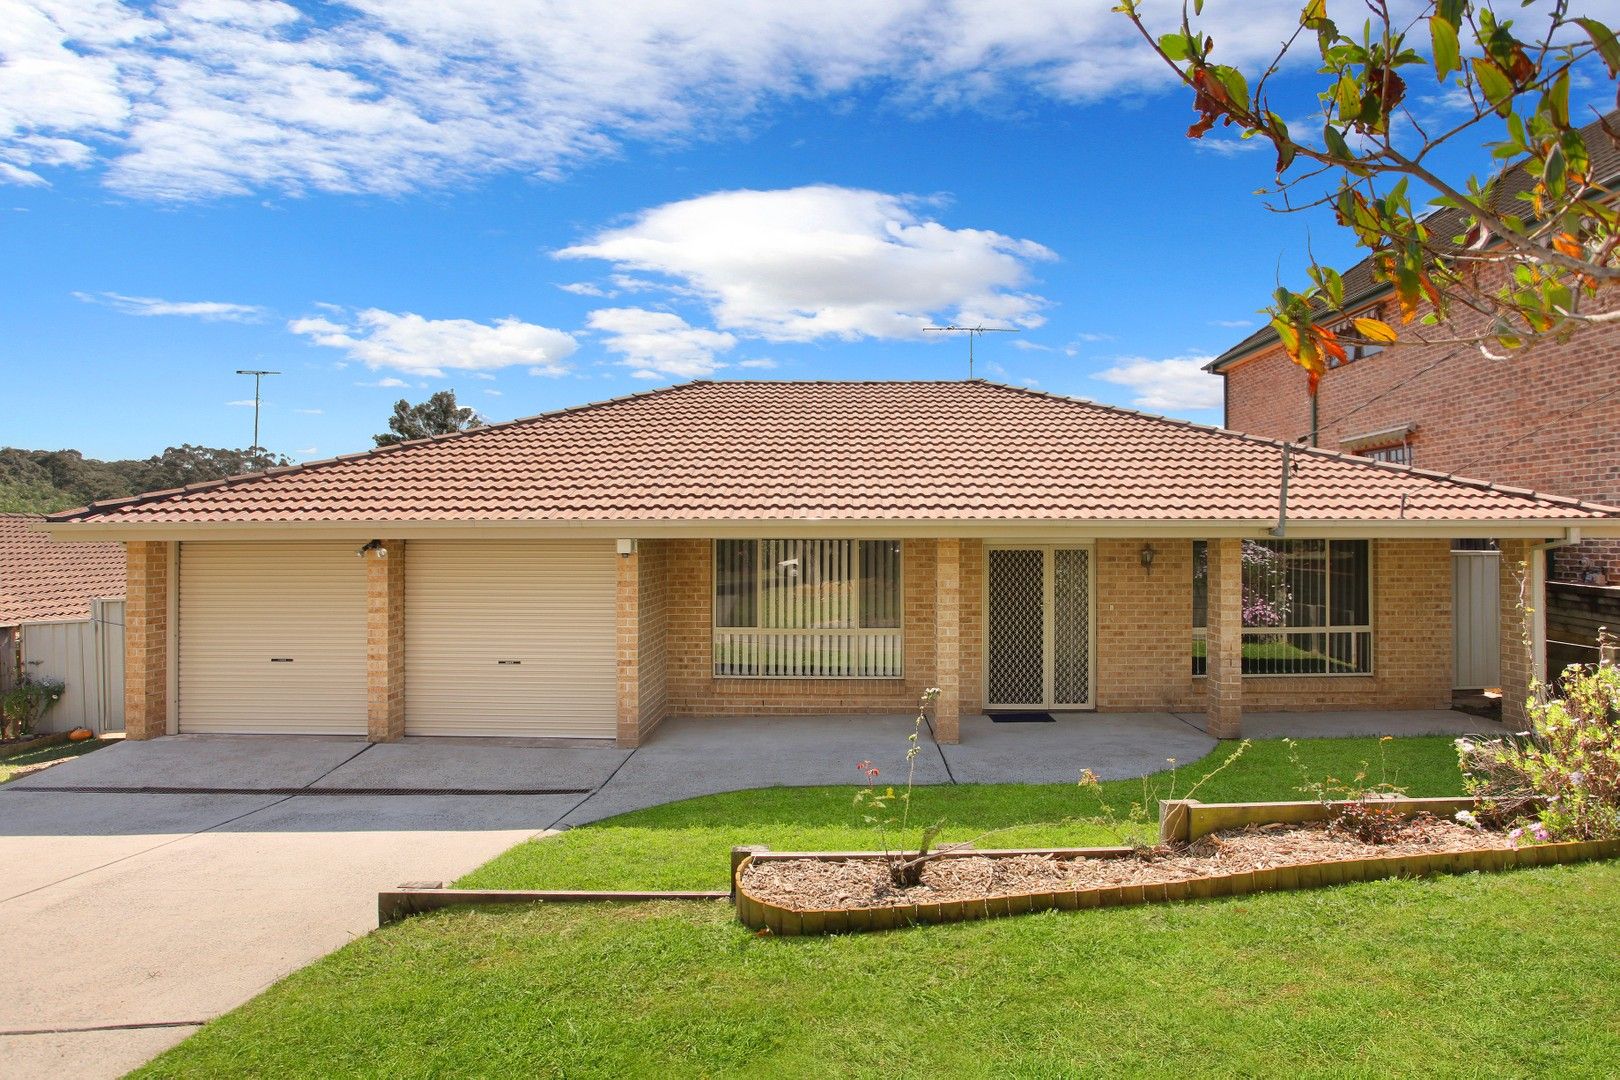 5 bedrooms House in 99 David Road CASTLE HILL NSW, 2154